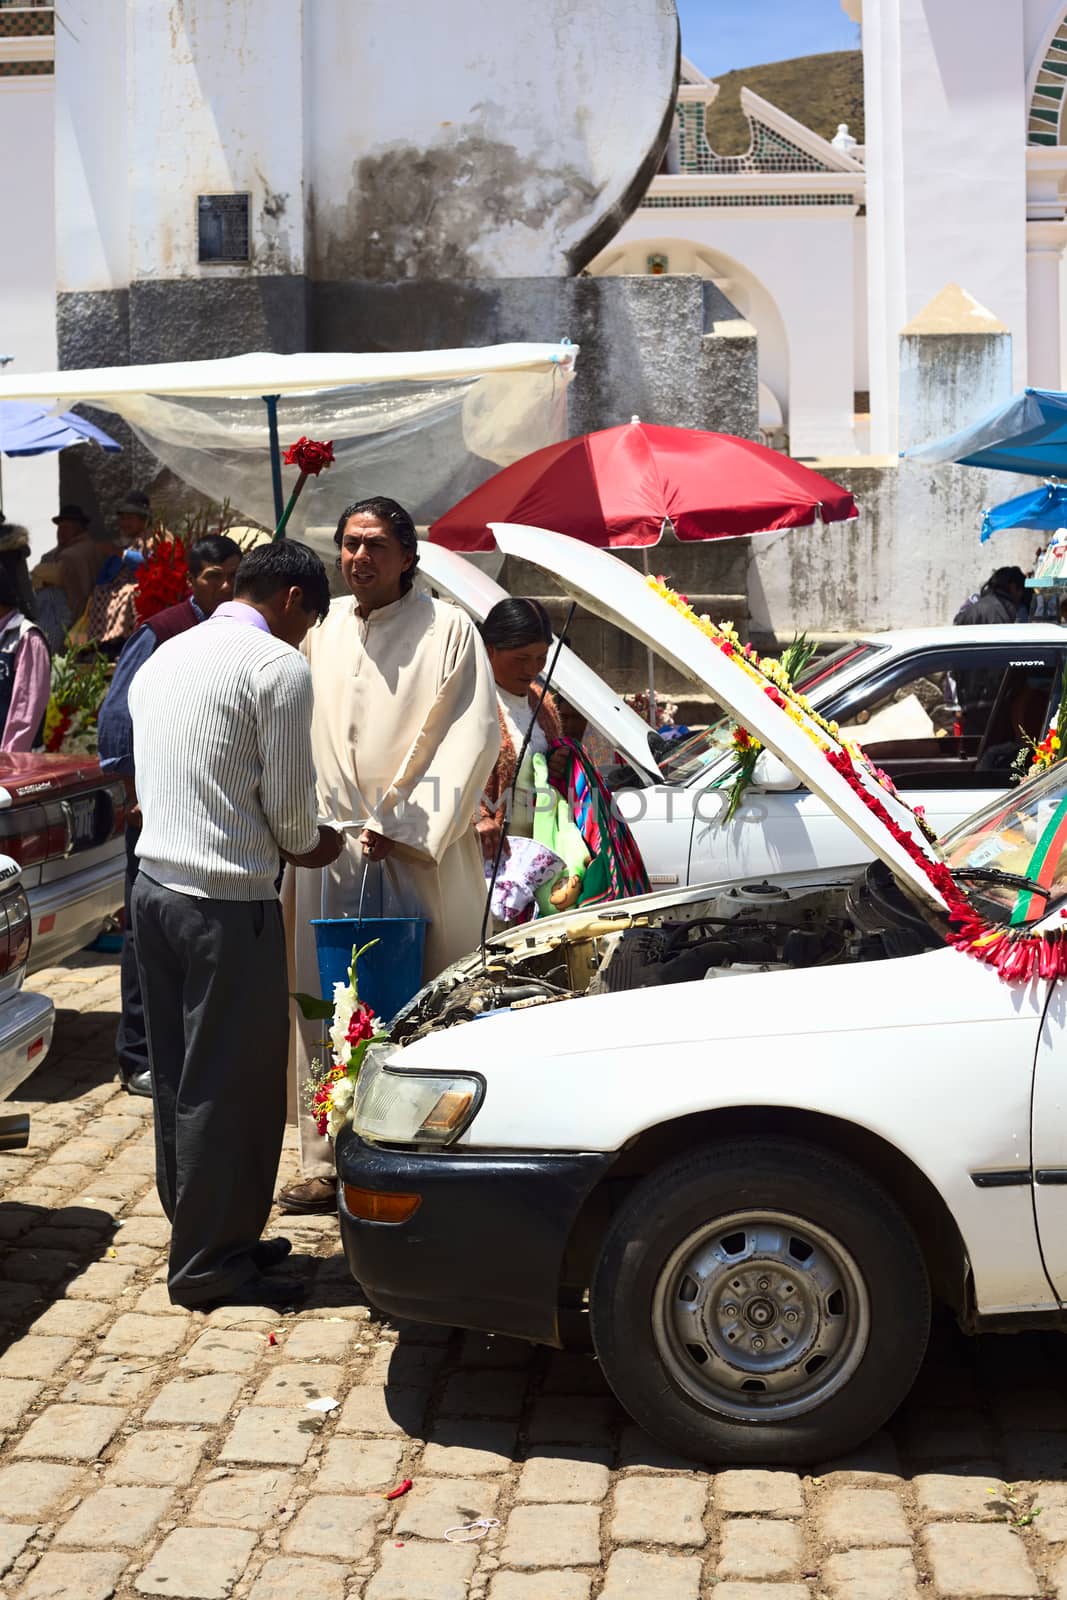 COPACABANA, BOLIVIA - OCTOBER 20, 2014: Unidentified priest blesses driver/owner of a car at the blessing of automobiles in front of the basilica on 6 de Agosto avenue in the center of the small tourist town on October 20, 2014 in Copacabana, Bolivia. Almost every day many cars, taxis, buses and vans are standing in line to receive blessing from a priest of the basilica.